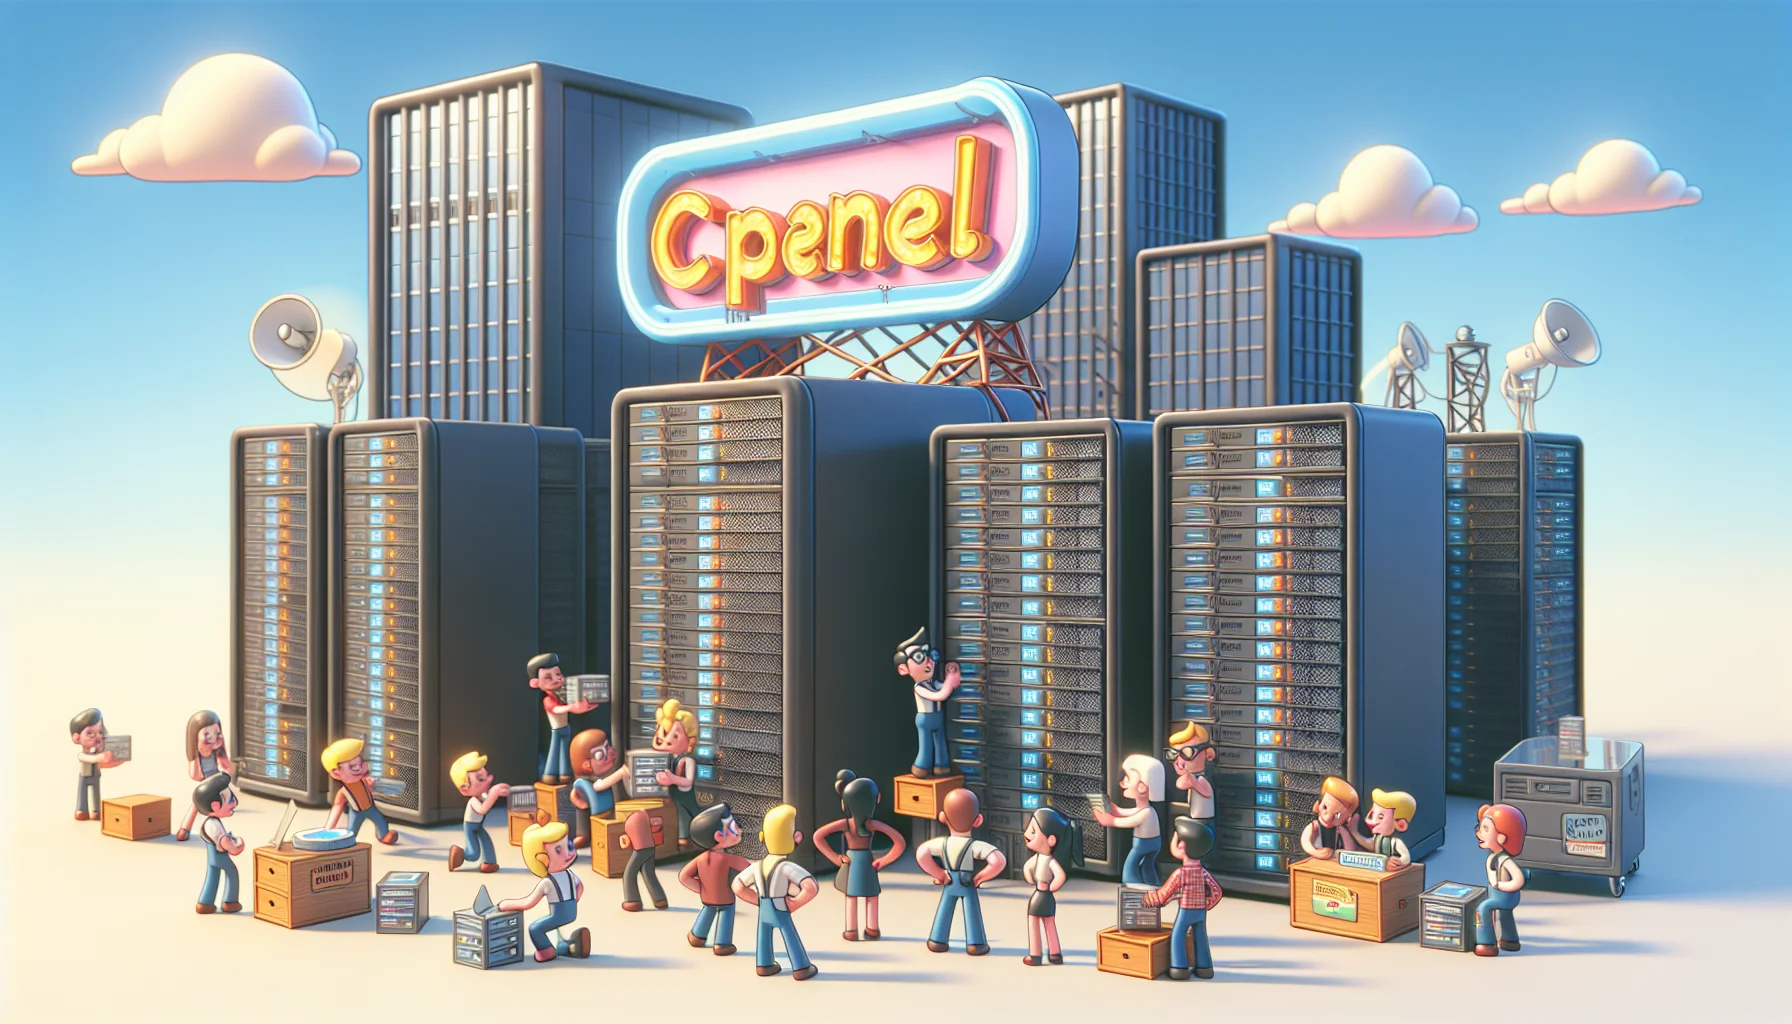 Create a detailed and humorous scene featuring a cartoony web hosting setting. It includes computer servers shaped like tall, modern buildings. Each server is labeled confidently with website names. A group of animated, diverse characters, each with different descent and gender are busily installing a large, glowing sign labeled 'cPanel'. The sign is eccentric and whimsical, sparking the interest of the characters. The mood of the scene is light-hearted and enticing, capturing the spirit of easy and engaging web hosting.